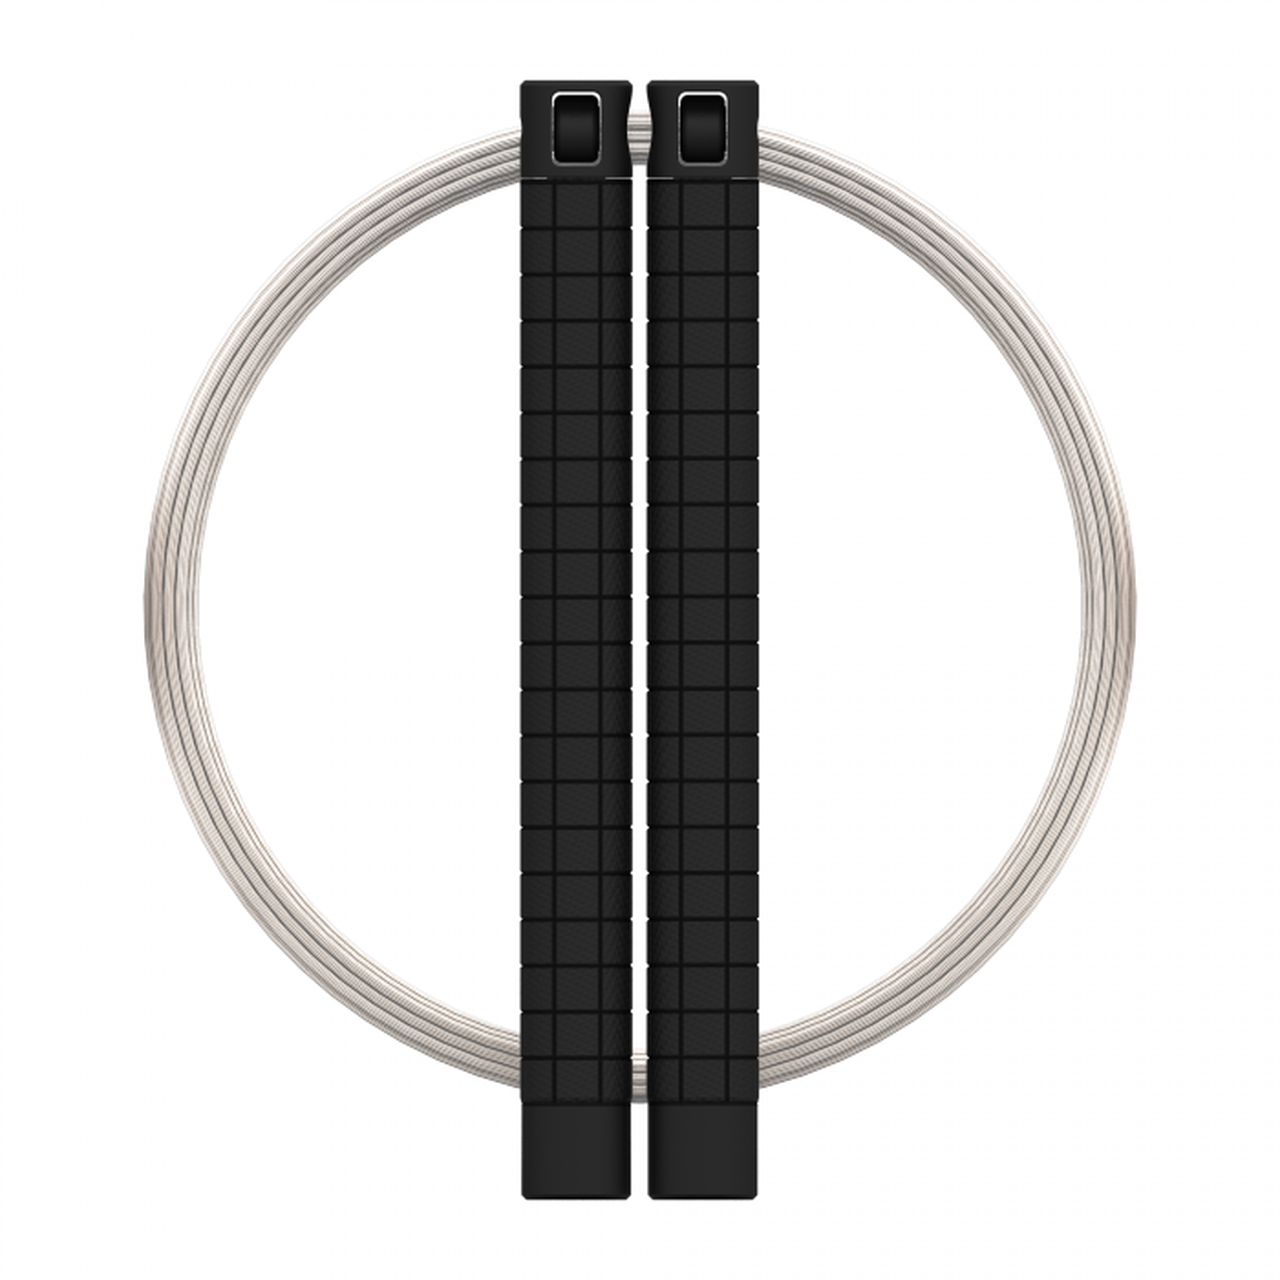 COMP Jump Rope - RPM